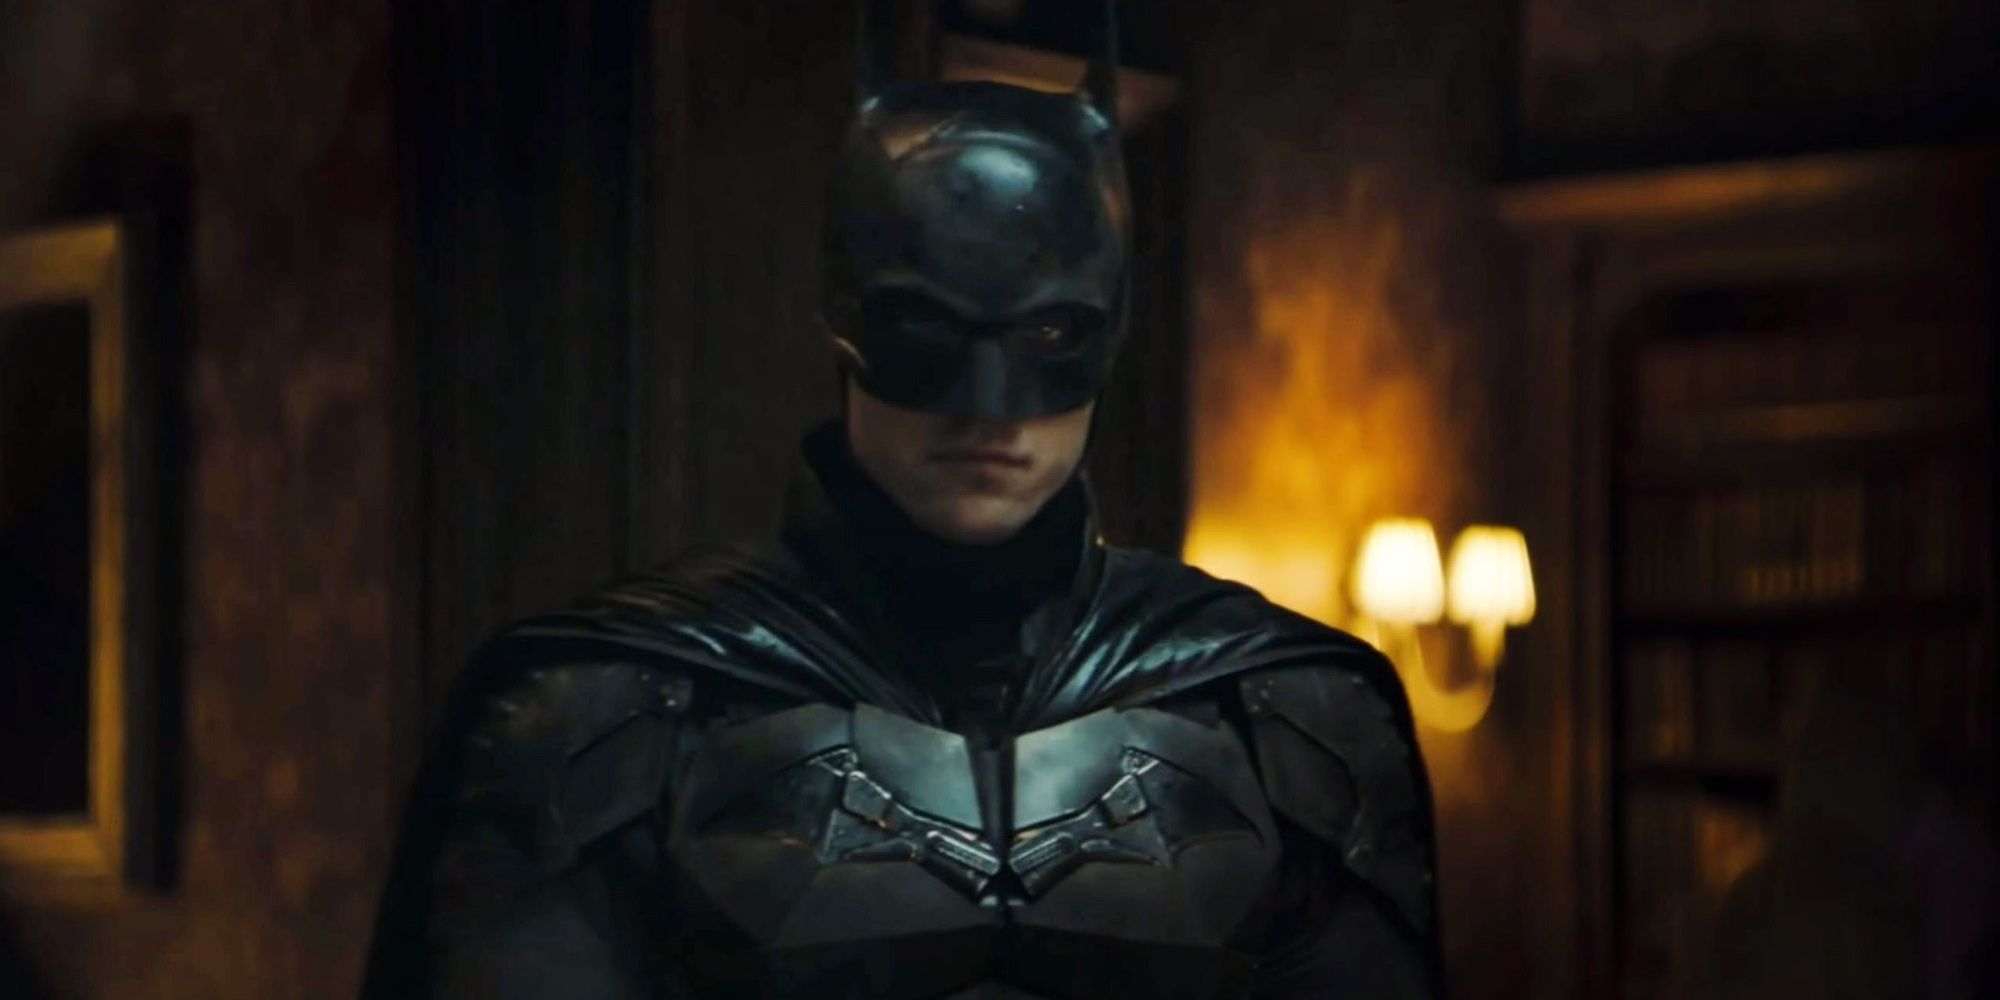 Batman standing in the middle of a room in The Batman